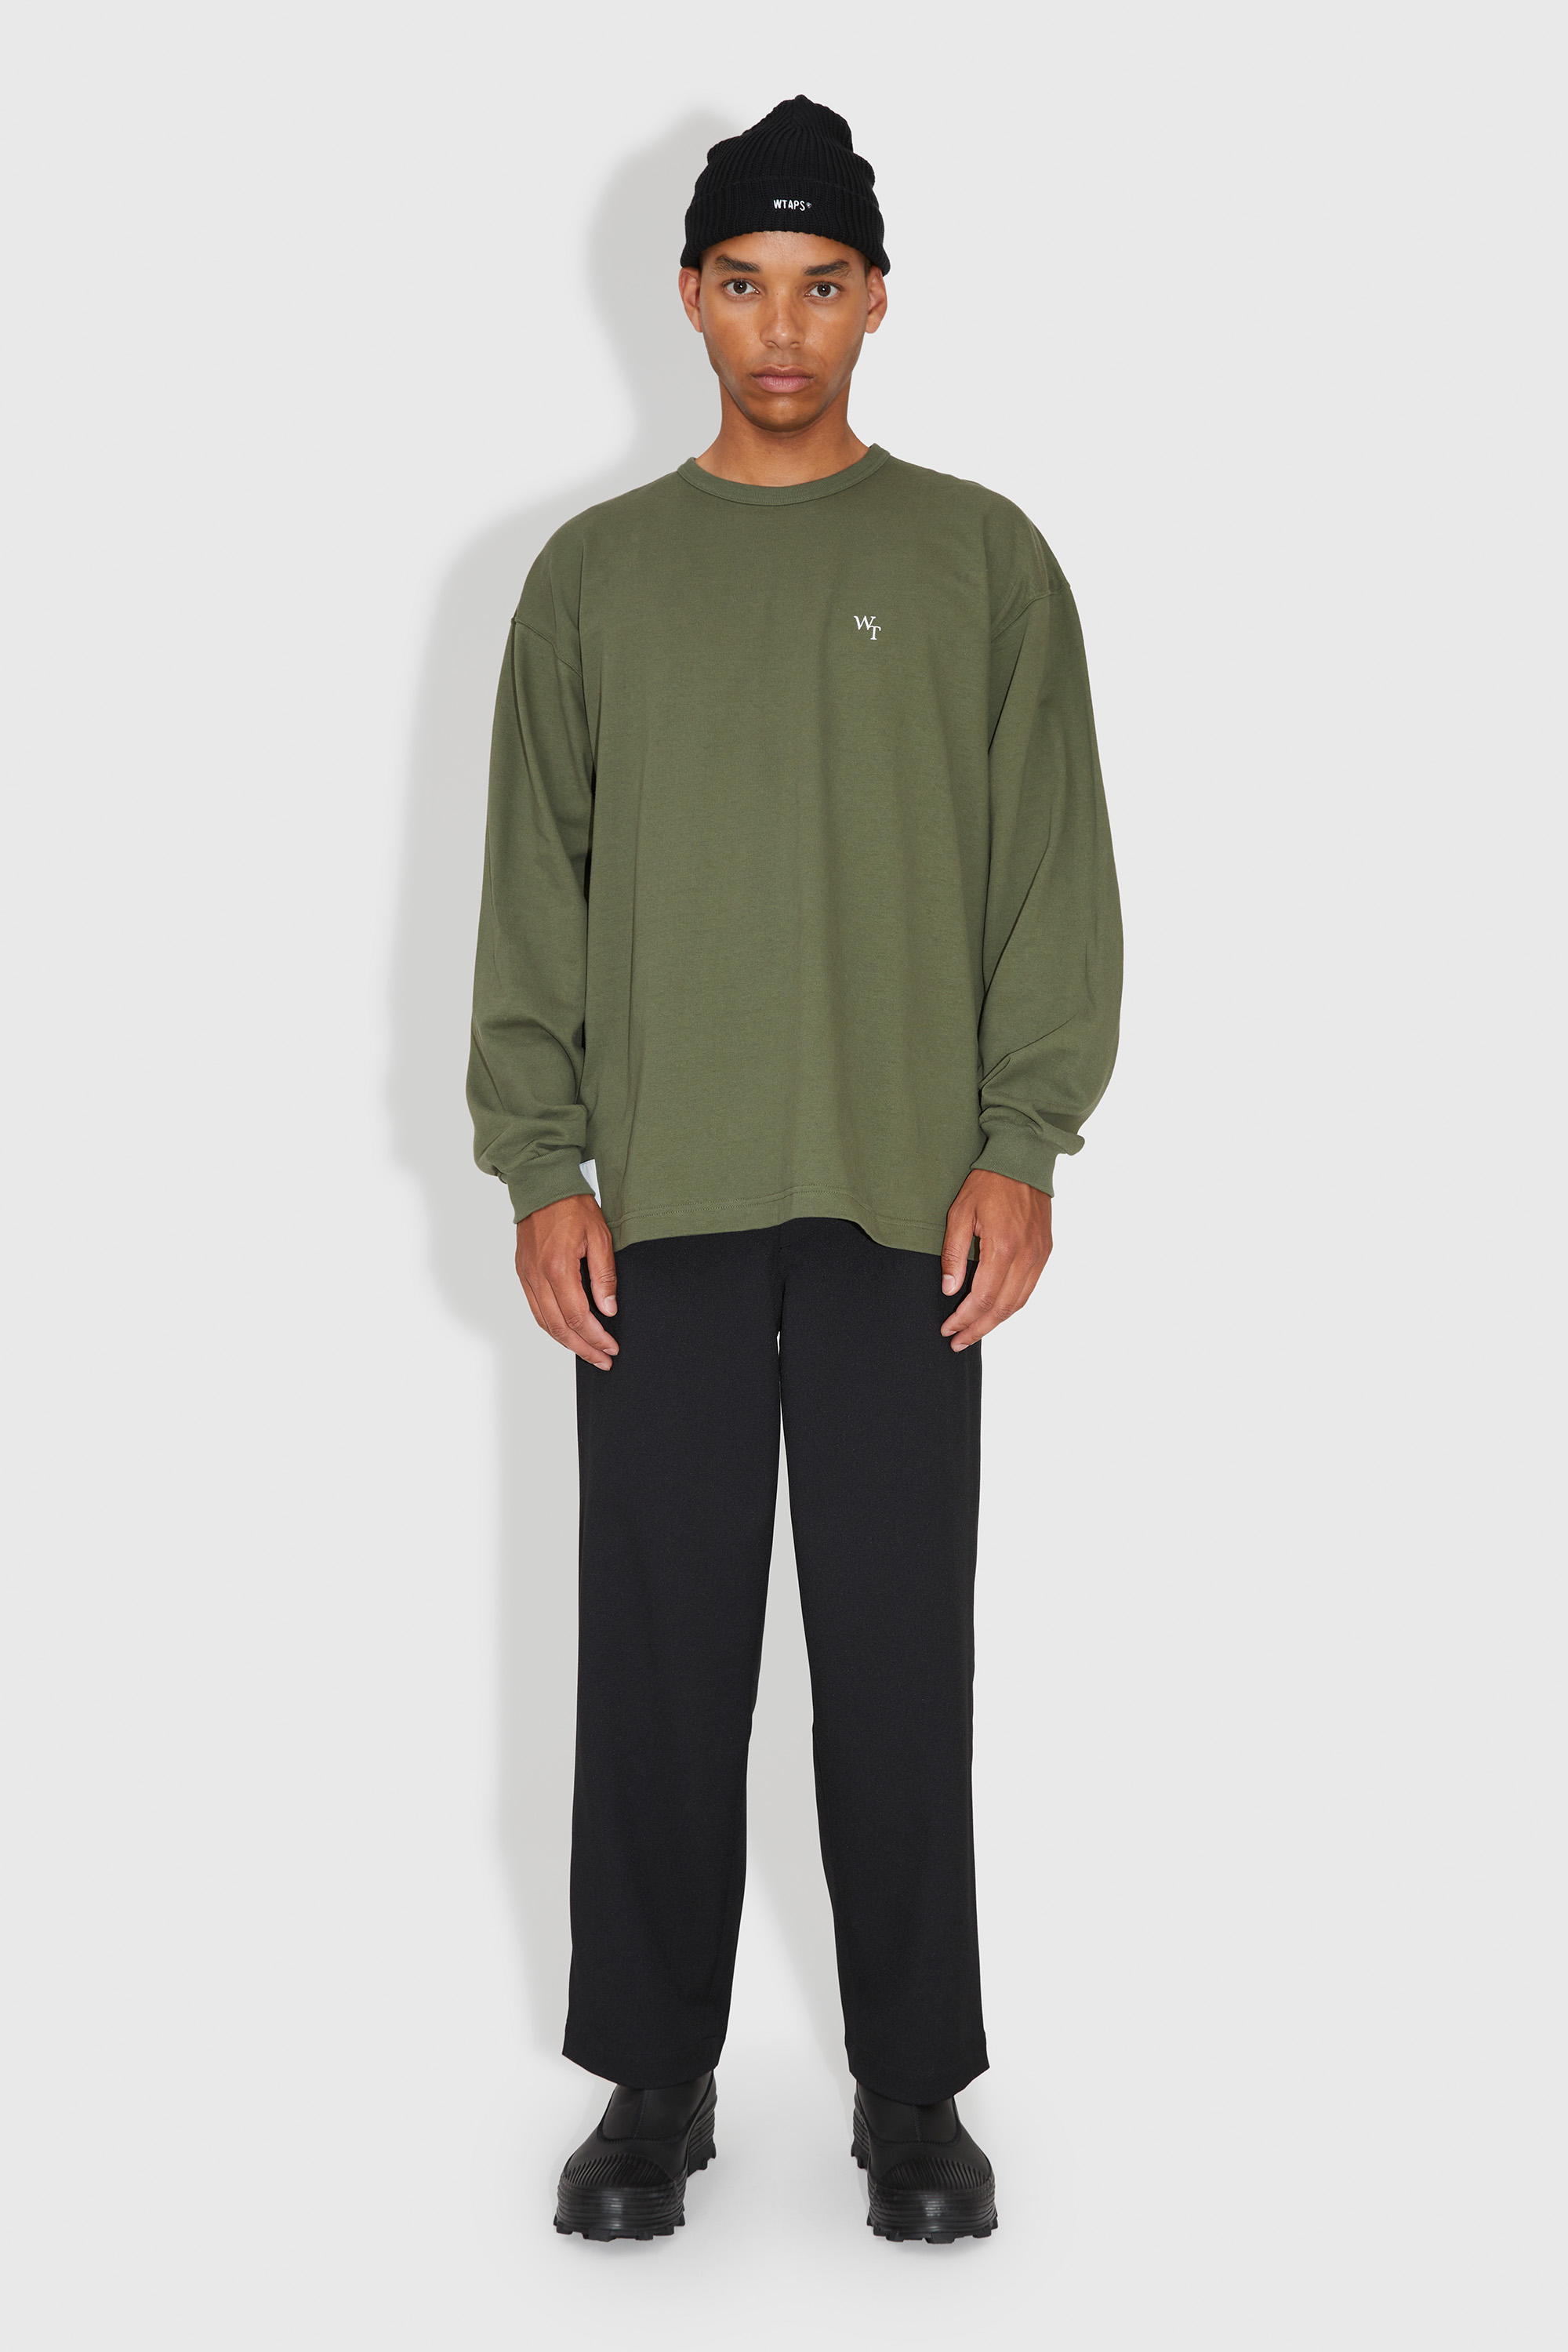 WTAPS Crease DL / Trousers Black | WoodWood.com